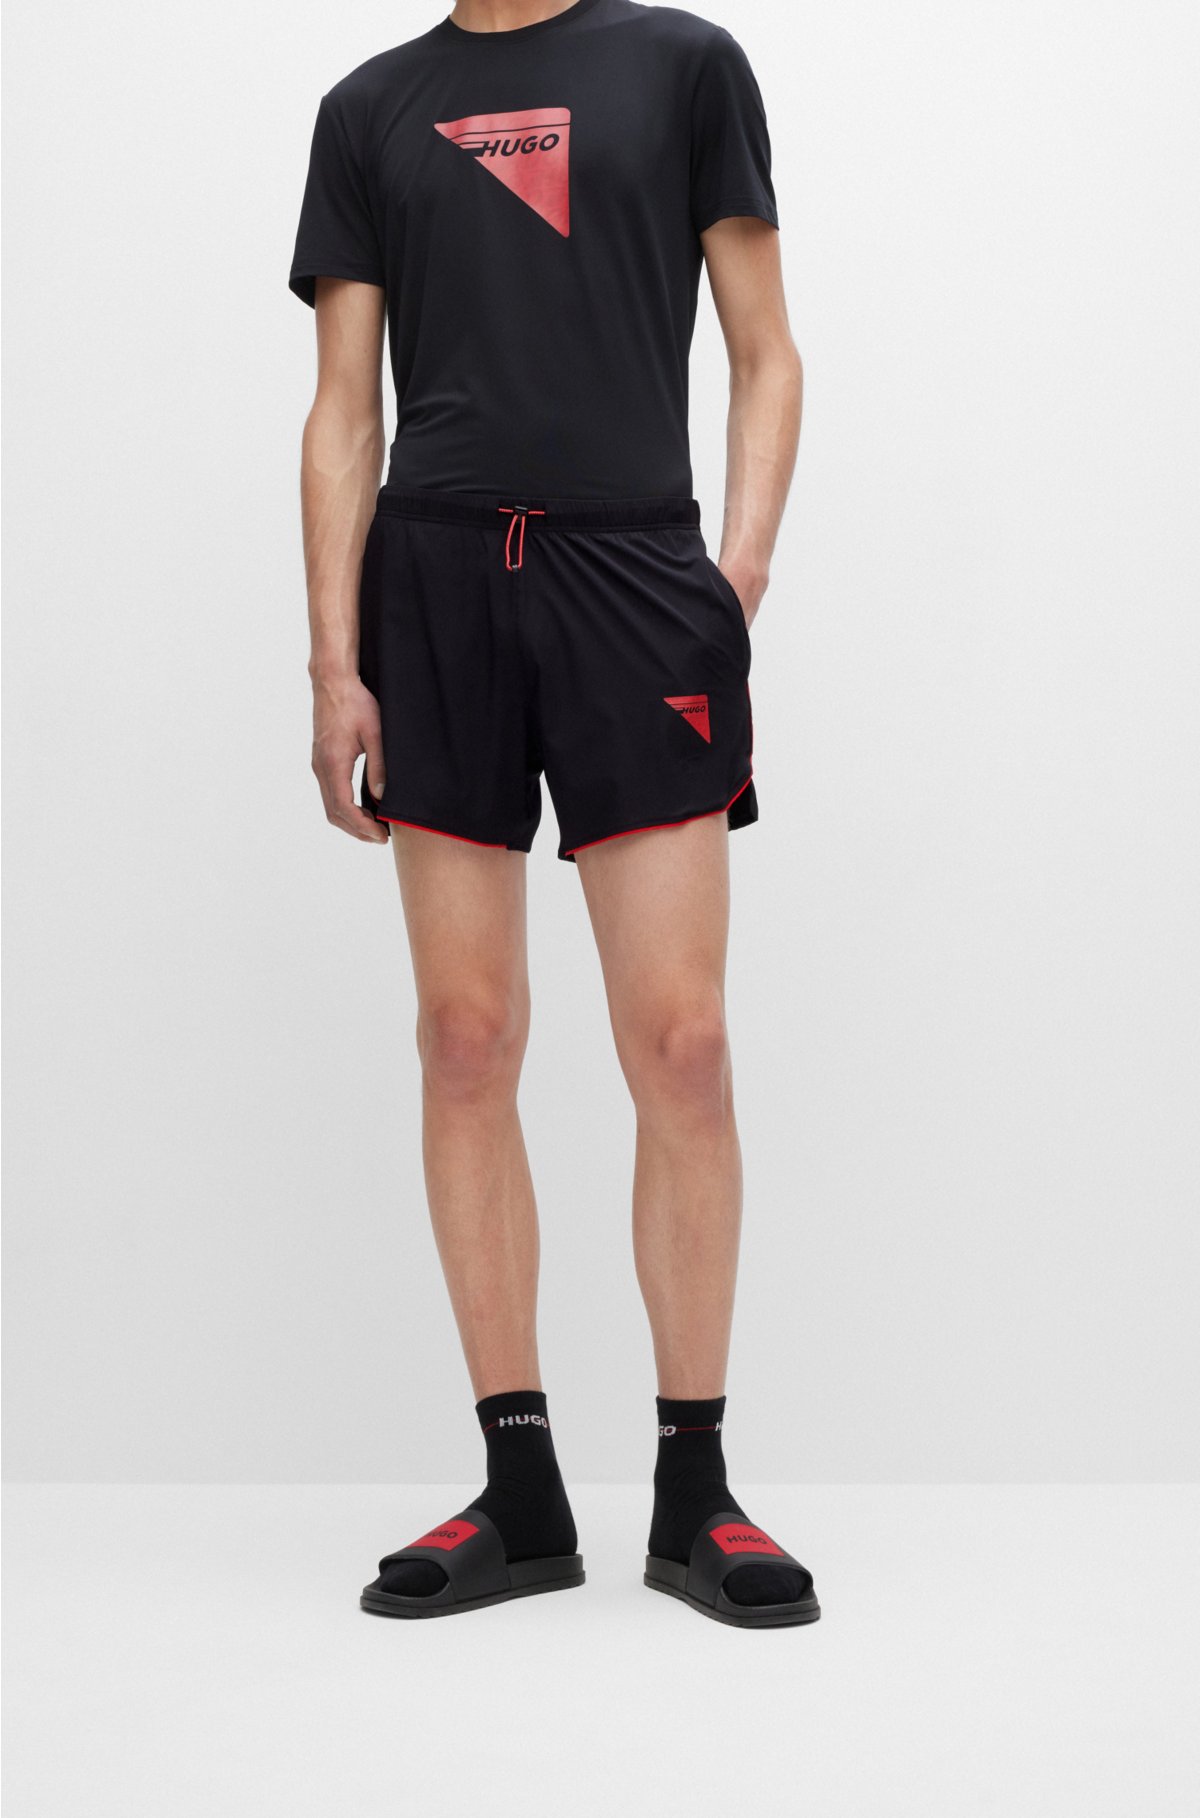 HUGO - Super-stretch logo with piping capsule shorts and